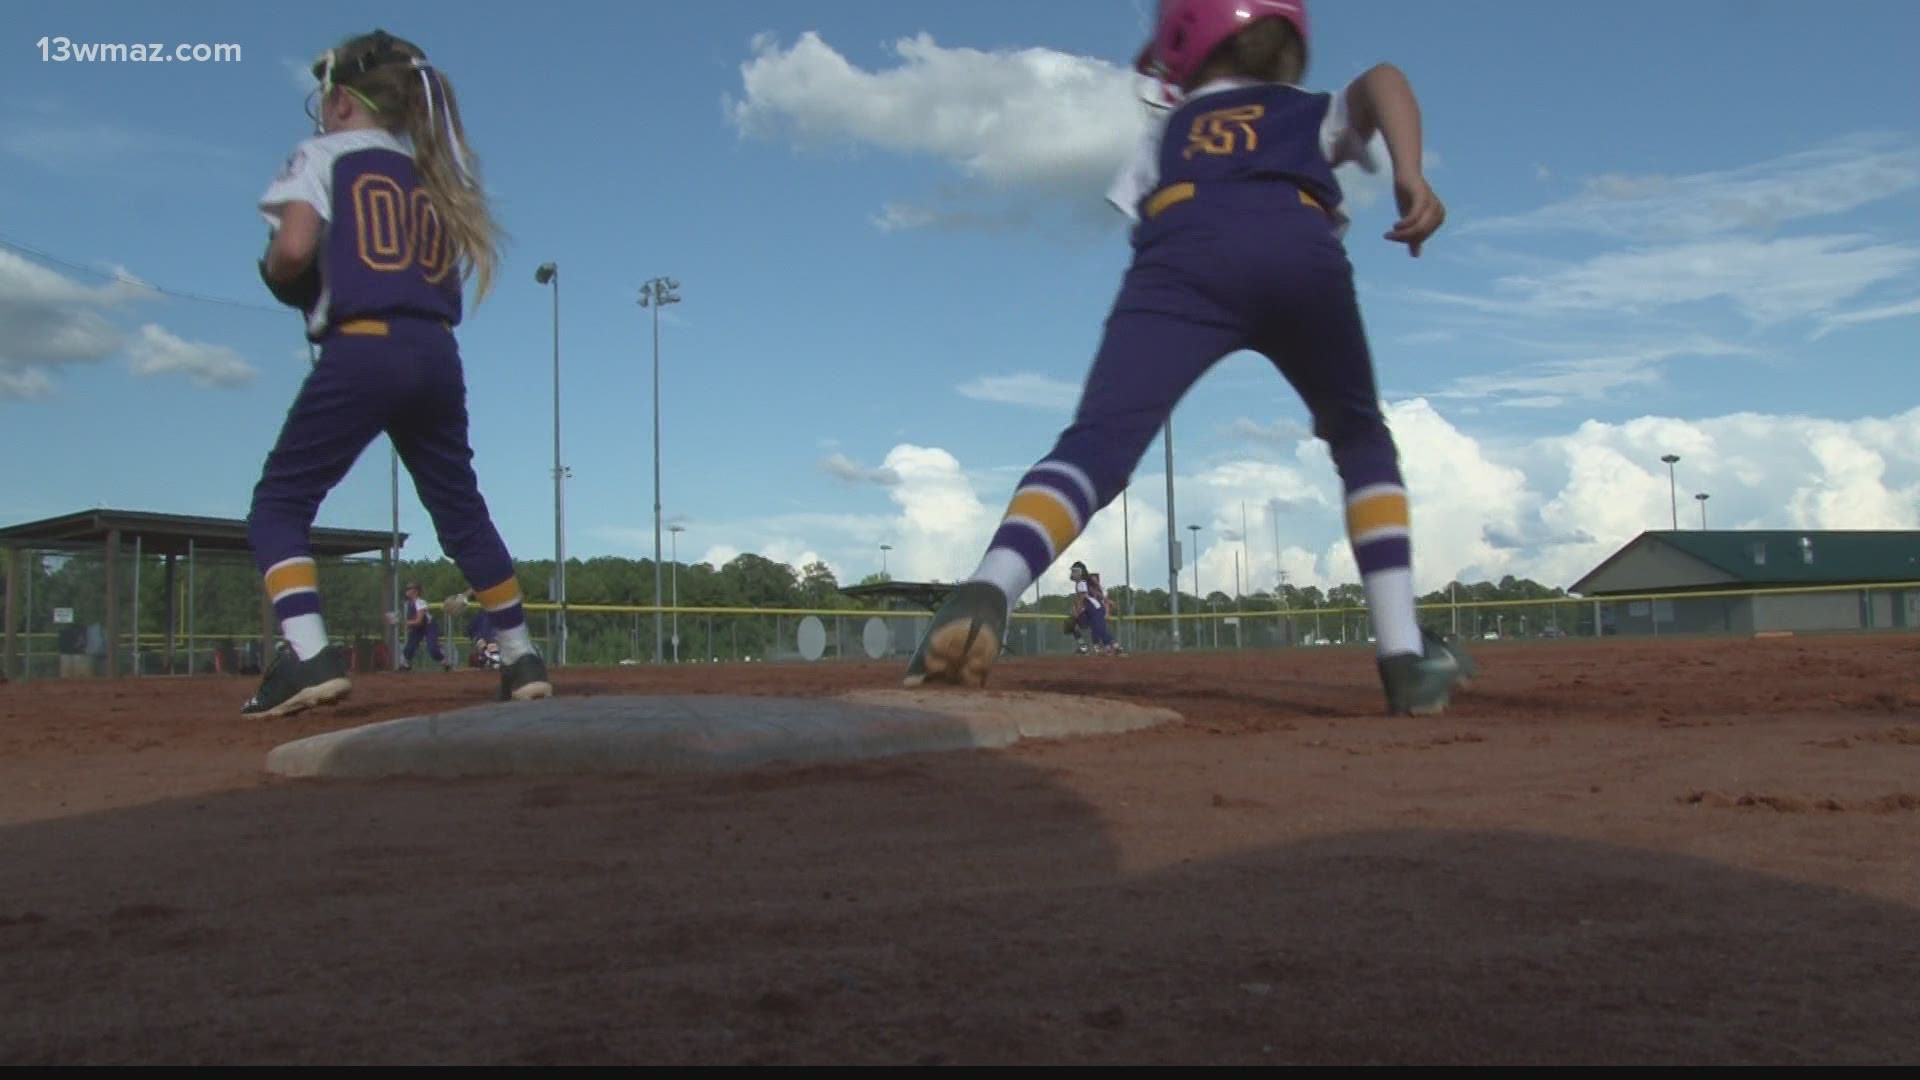 The Jones County Darlings will represent Central Georgia in the Dixie Youth World Series softball tournament